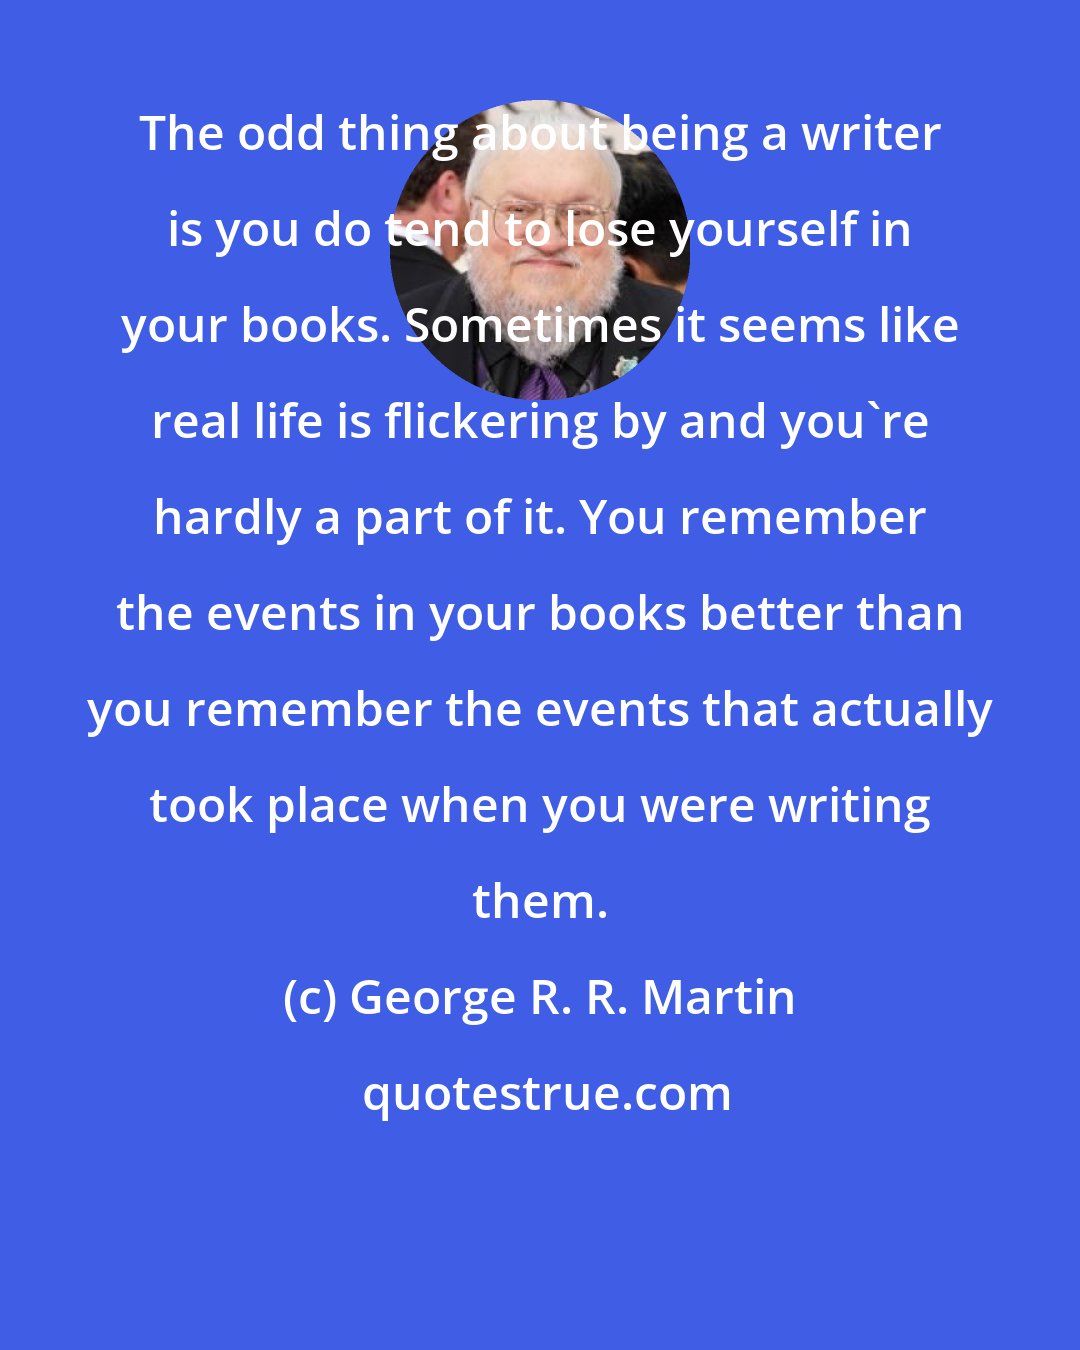 George R. R. Martin: The odd thing about being a writer is you do tend to lose yourself in your books. Sometimes it seems like real life is flickering by and you're hardly a part of it. You remember the events in your books better than you remember the events that actually took place when you were writing them.